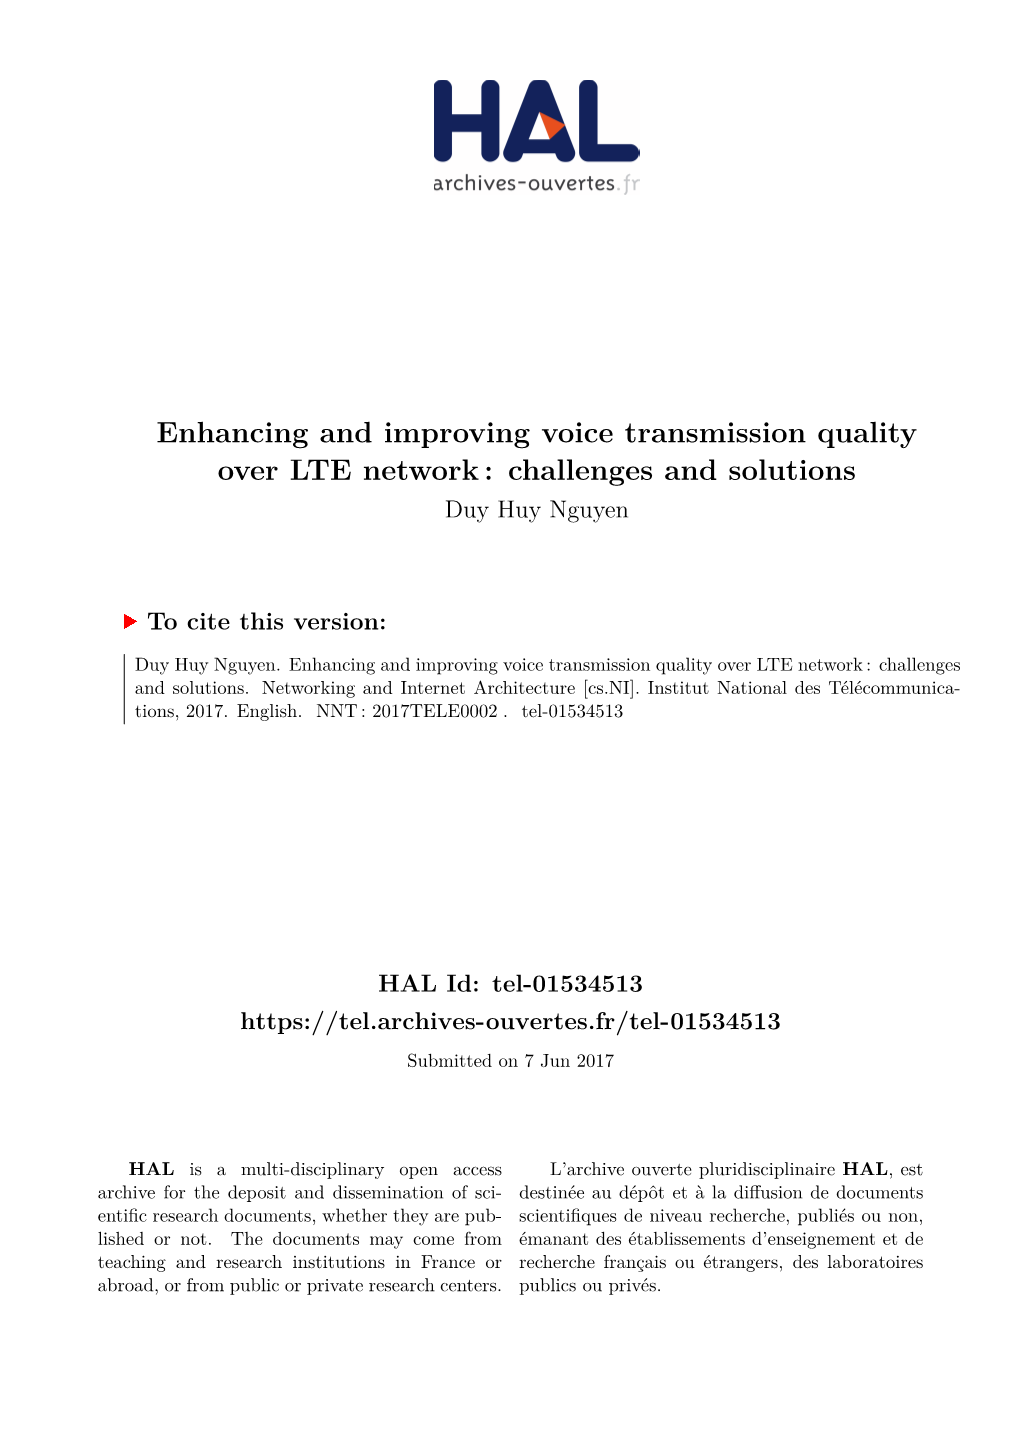 Enhancing and Improving Voice Transmission Quality Over LTE Network: Challenges and Solutions